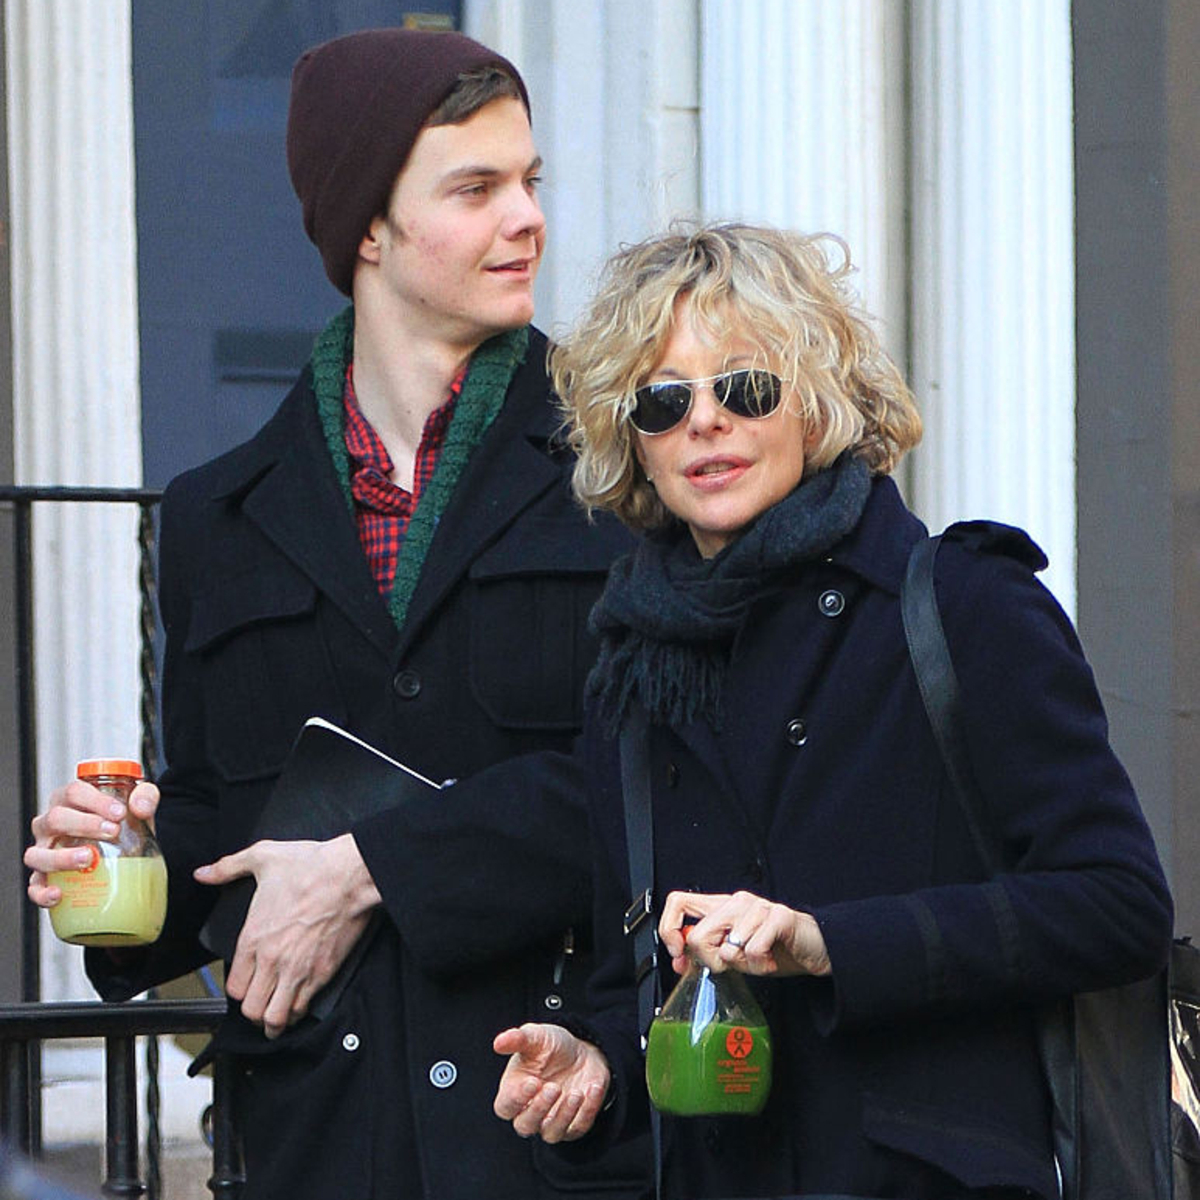 Meg Ryan is facing resistance to the “Nepo Baby” label for her son, Jack Quaid, whom she shares with Dennis Quaid. She’s pointing to his talent and work ethic as the reasons behind the success of The Boys star.